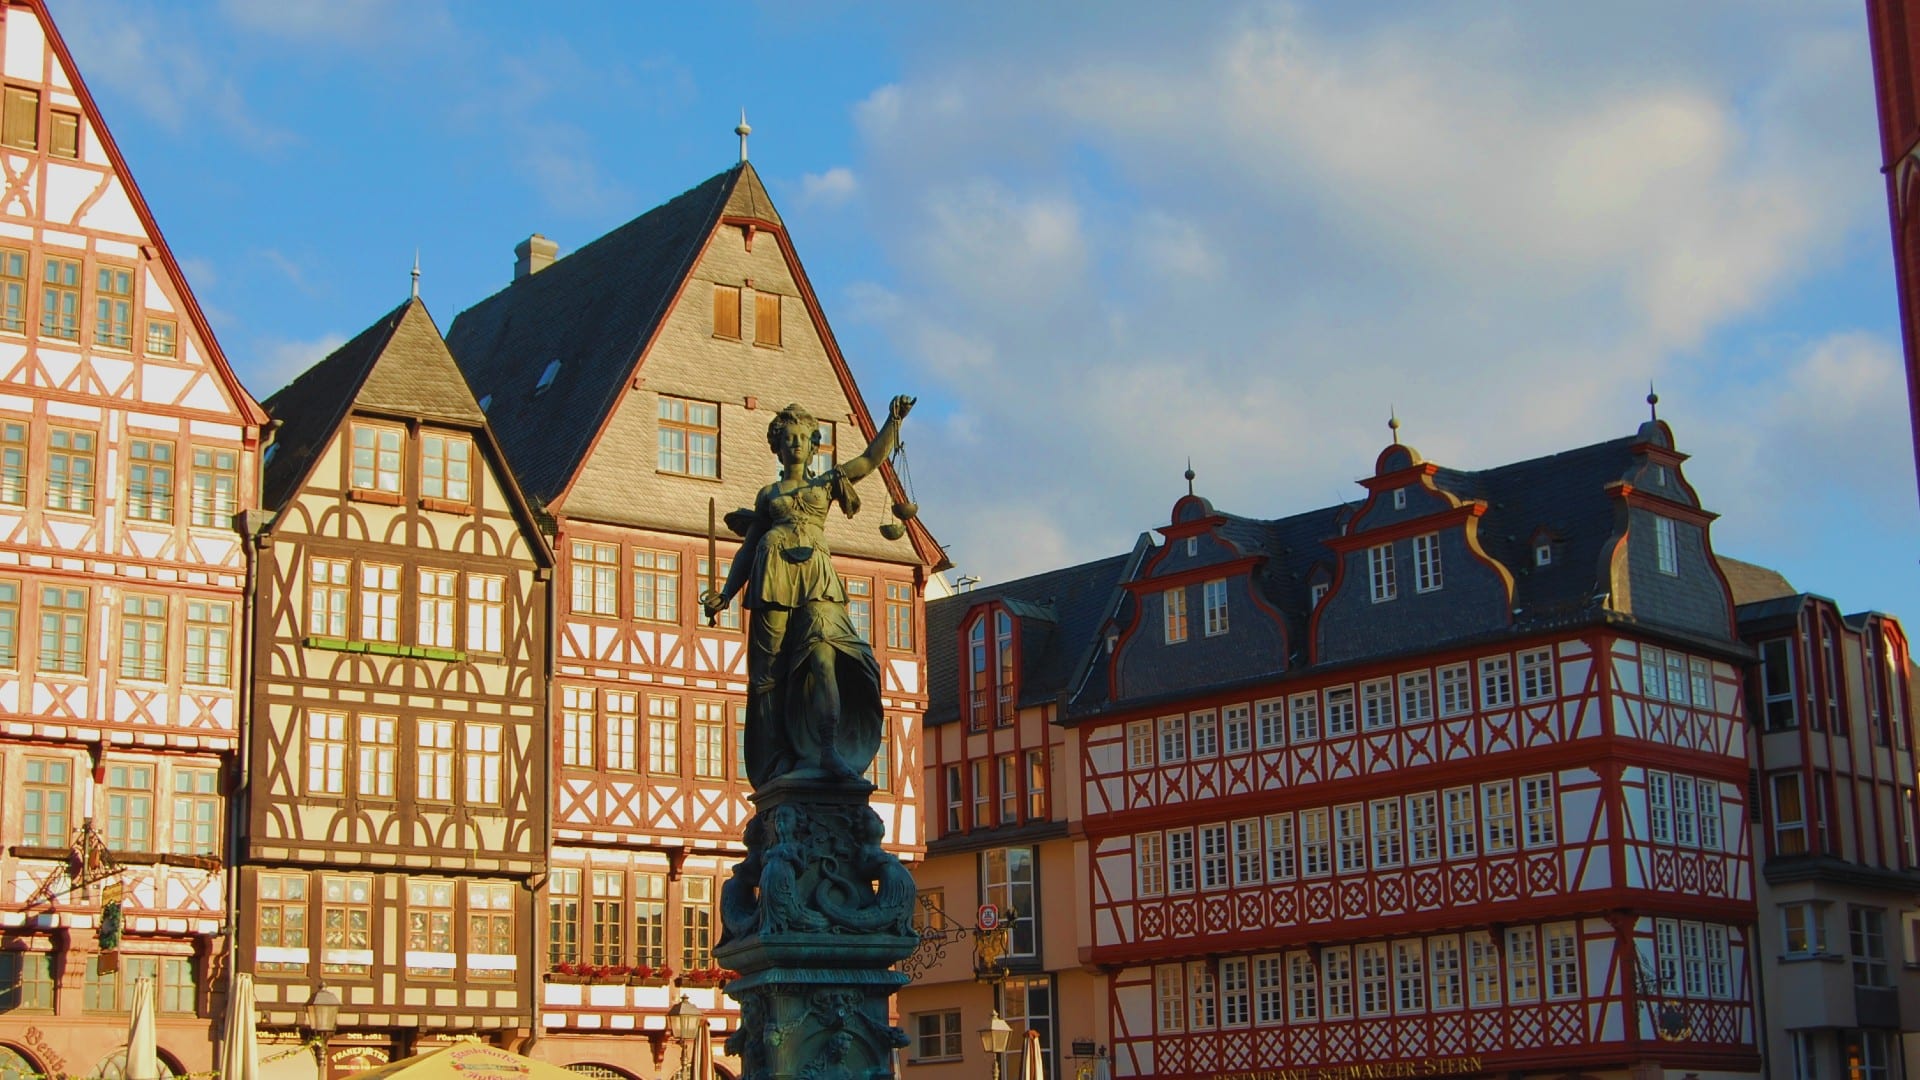 Home to many historic landmarks, quaint squares and gothic churches, Zentrum-Altstadt, Frankfurt’s Old Town, is also where many of the city’s best hotels are found